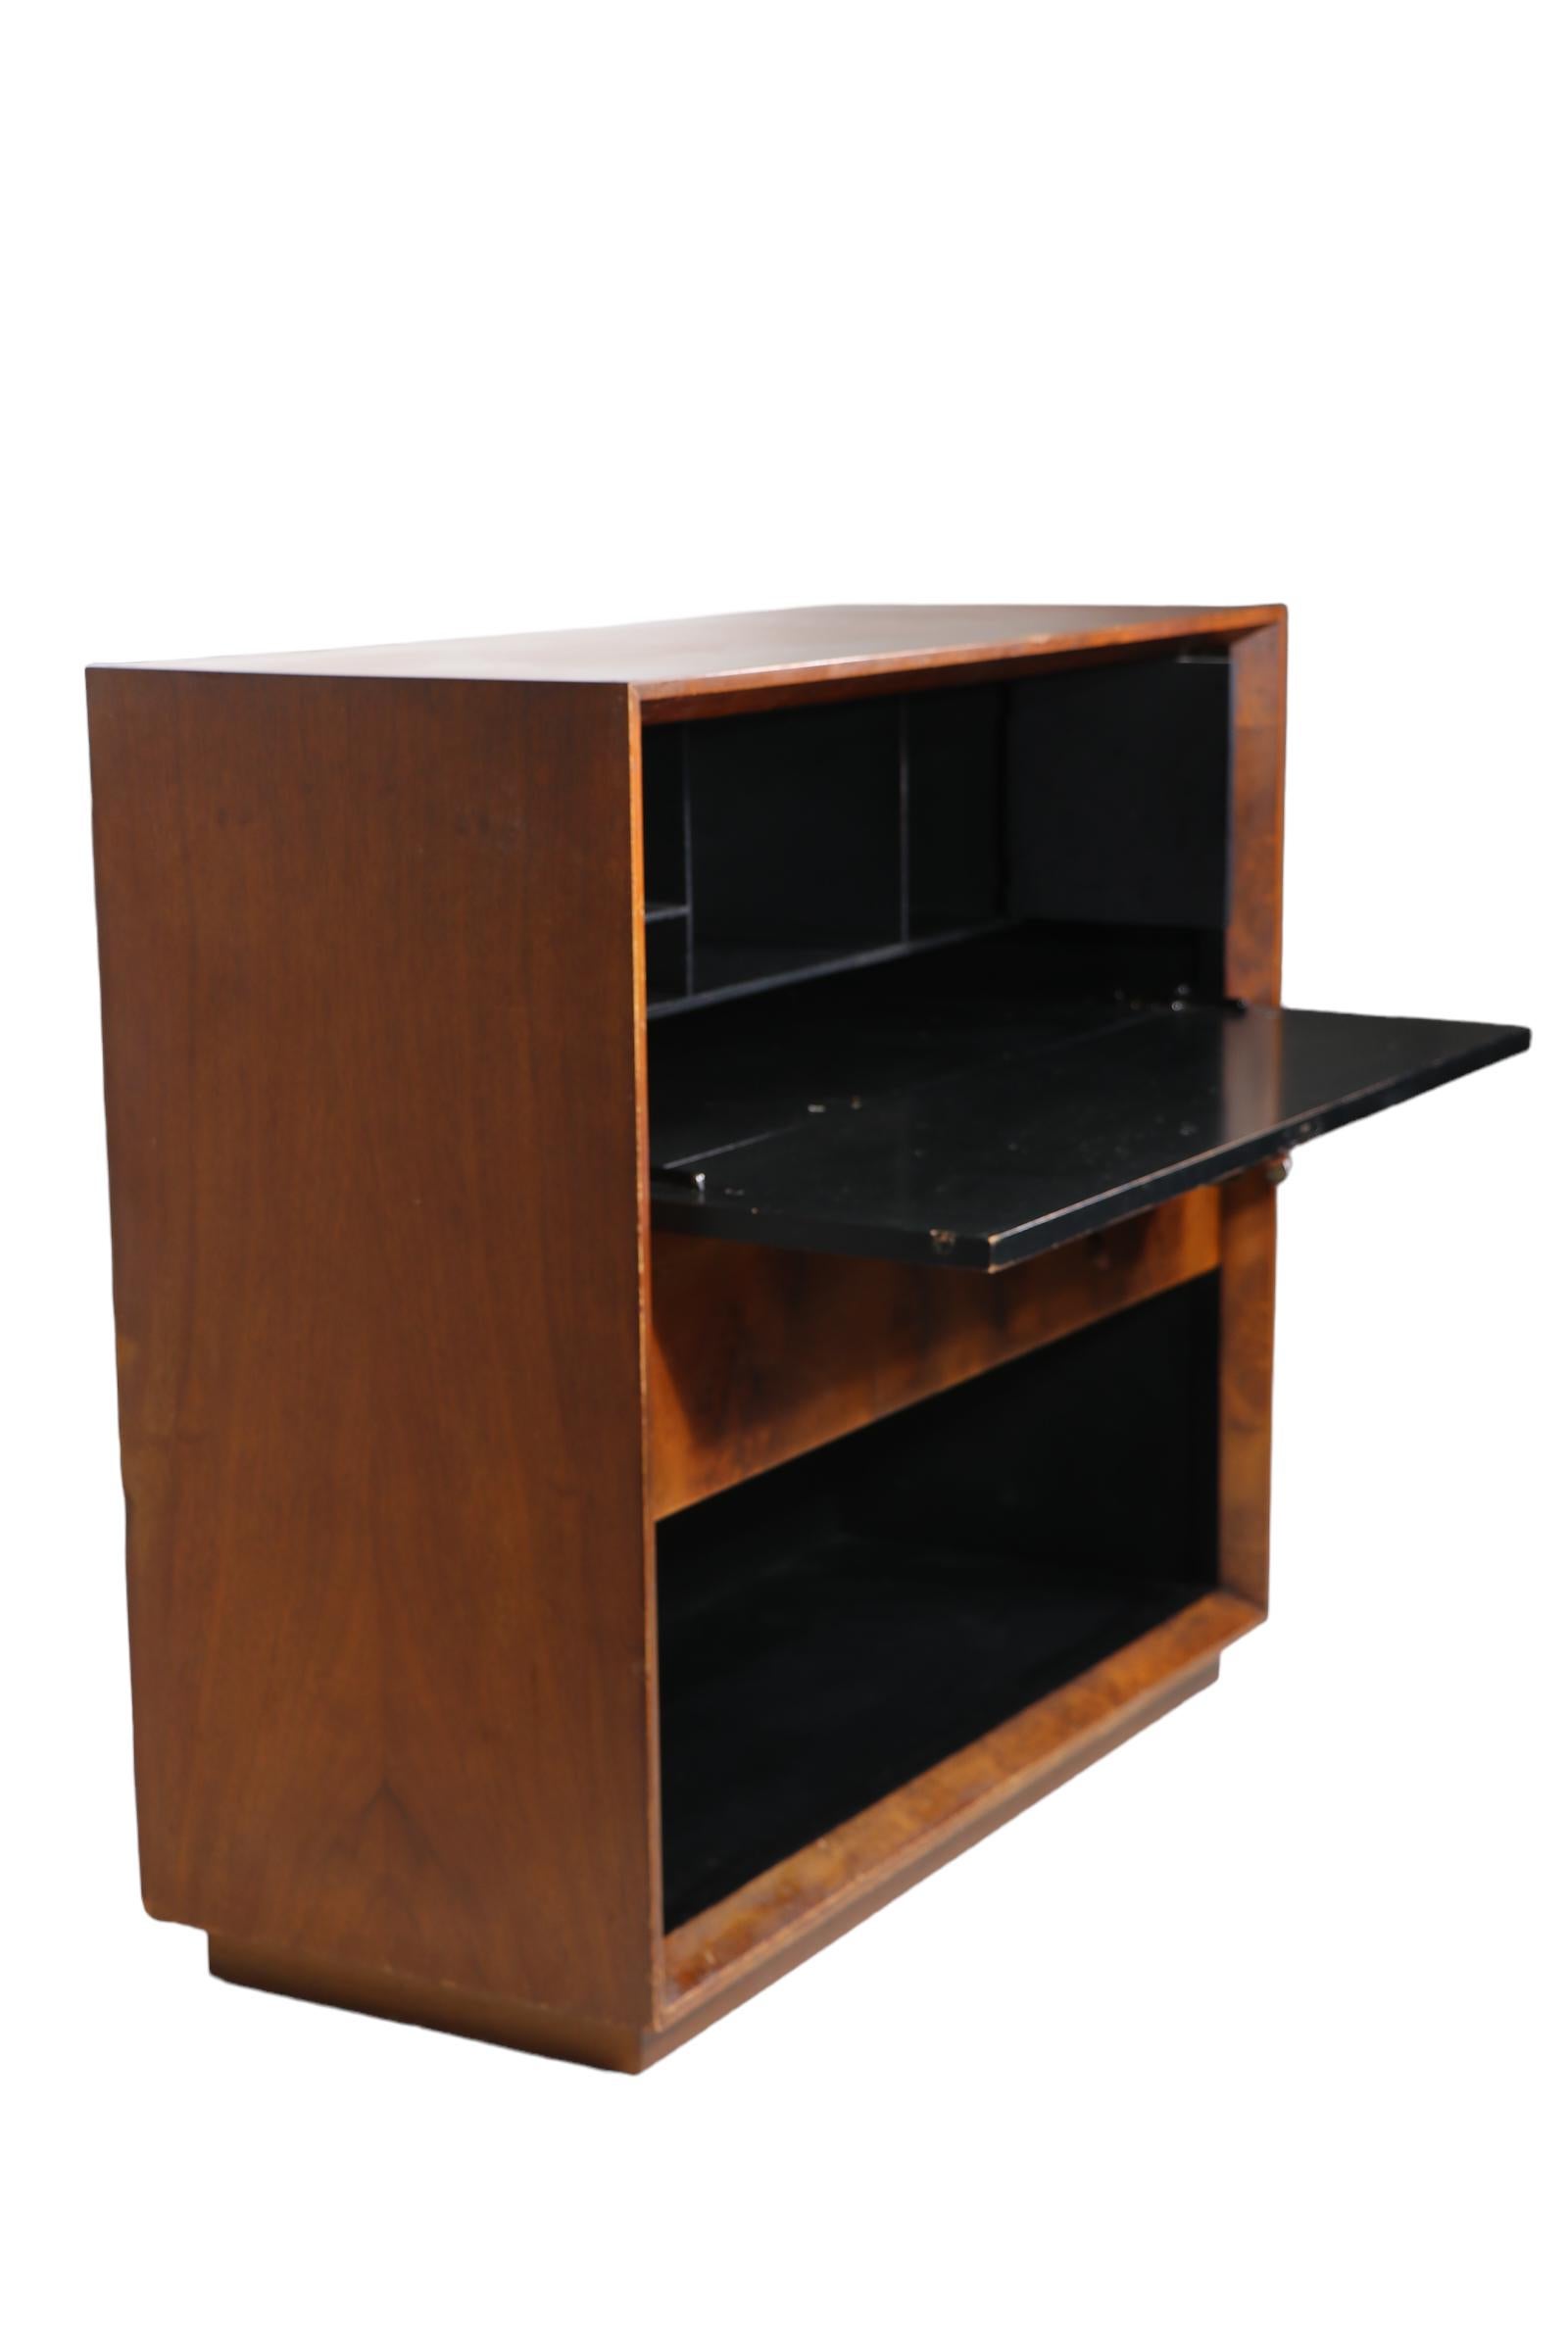 20th Century Art Deco Palladio Fall Front Desk by Gilbert Rohde for Herman Miller c. 1940’s For Sale